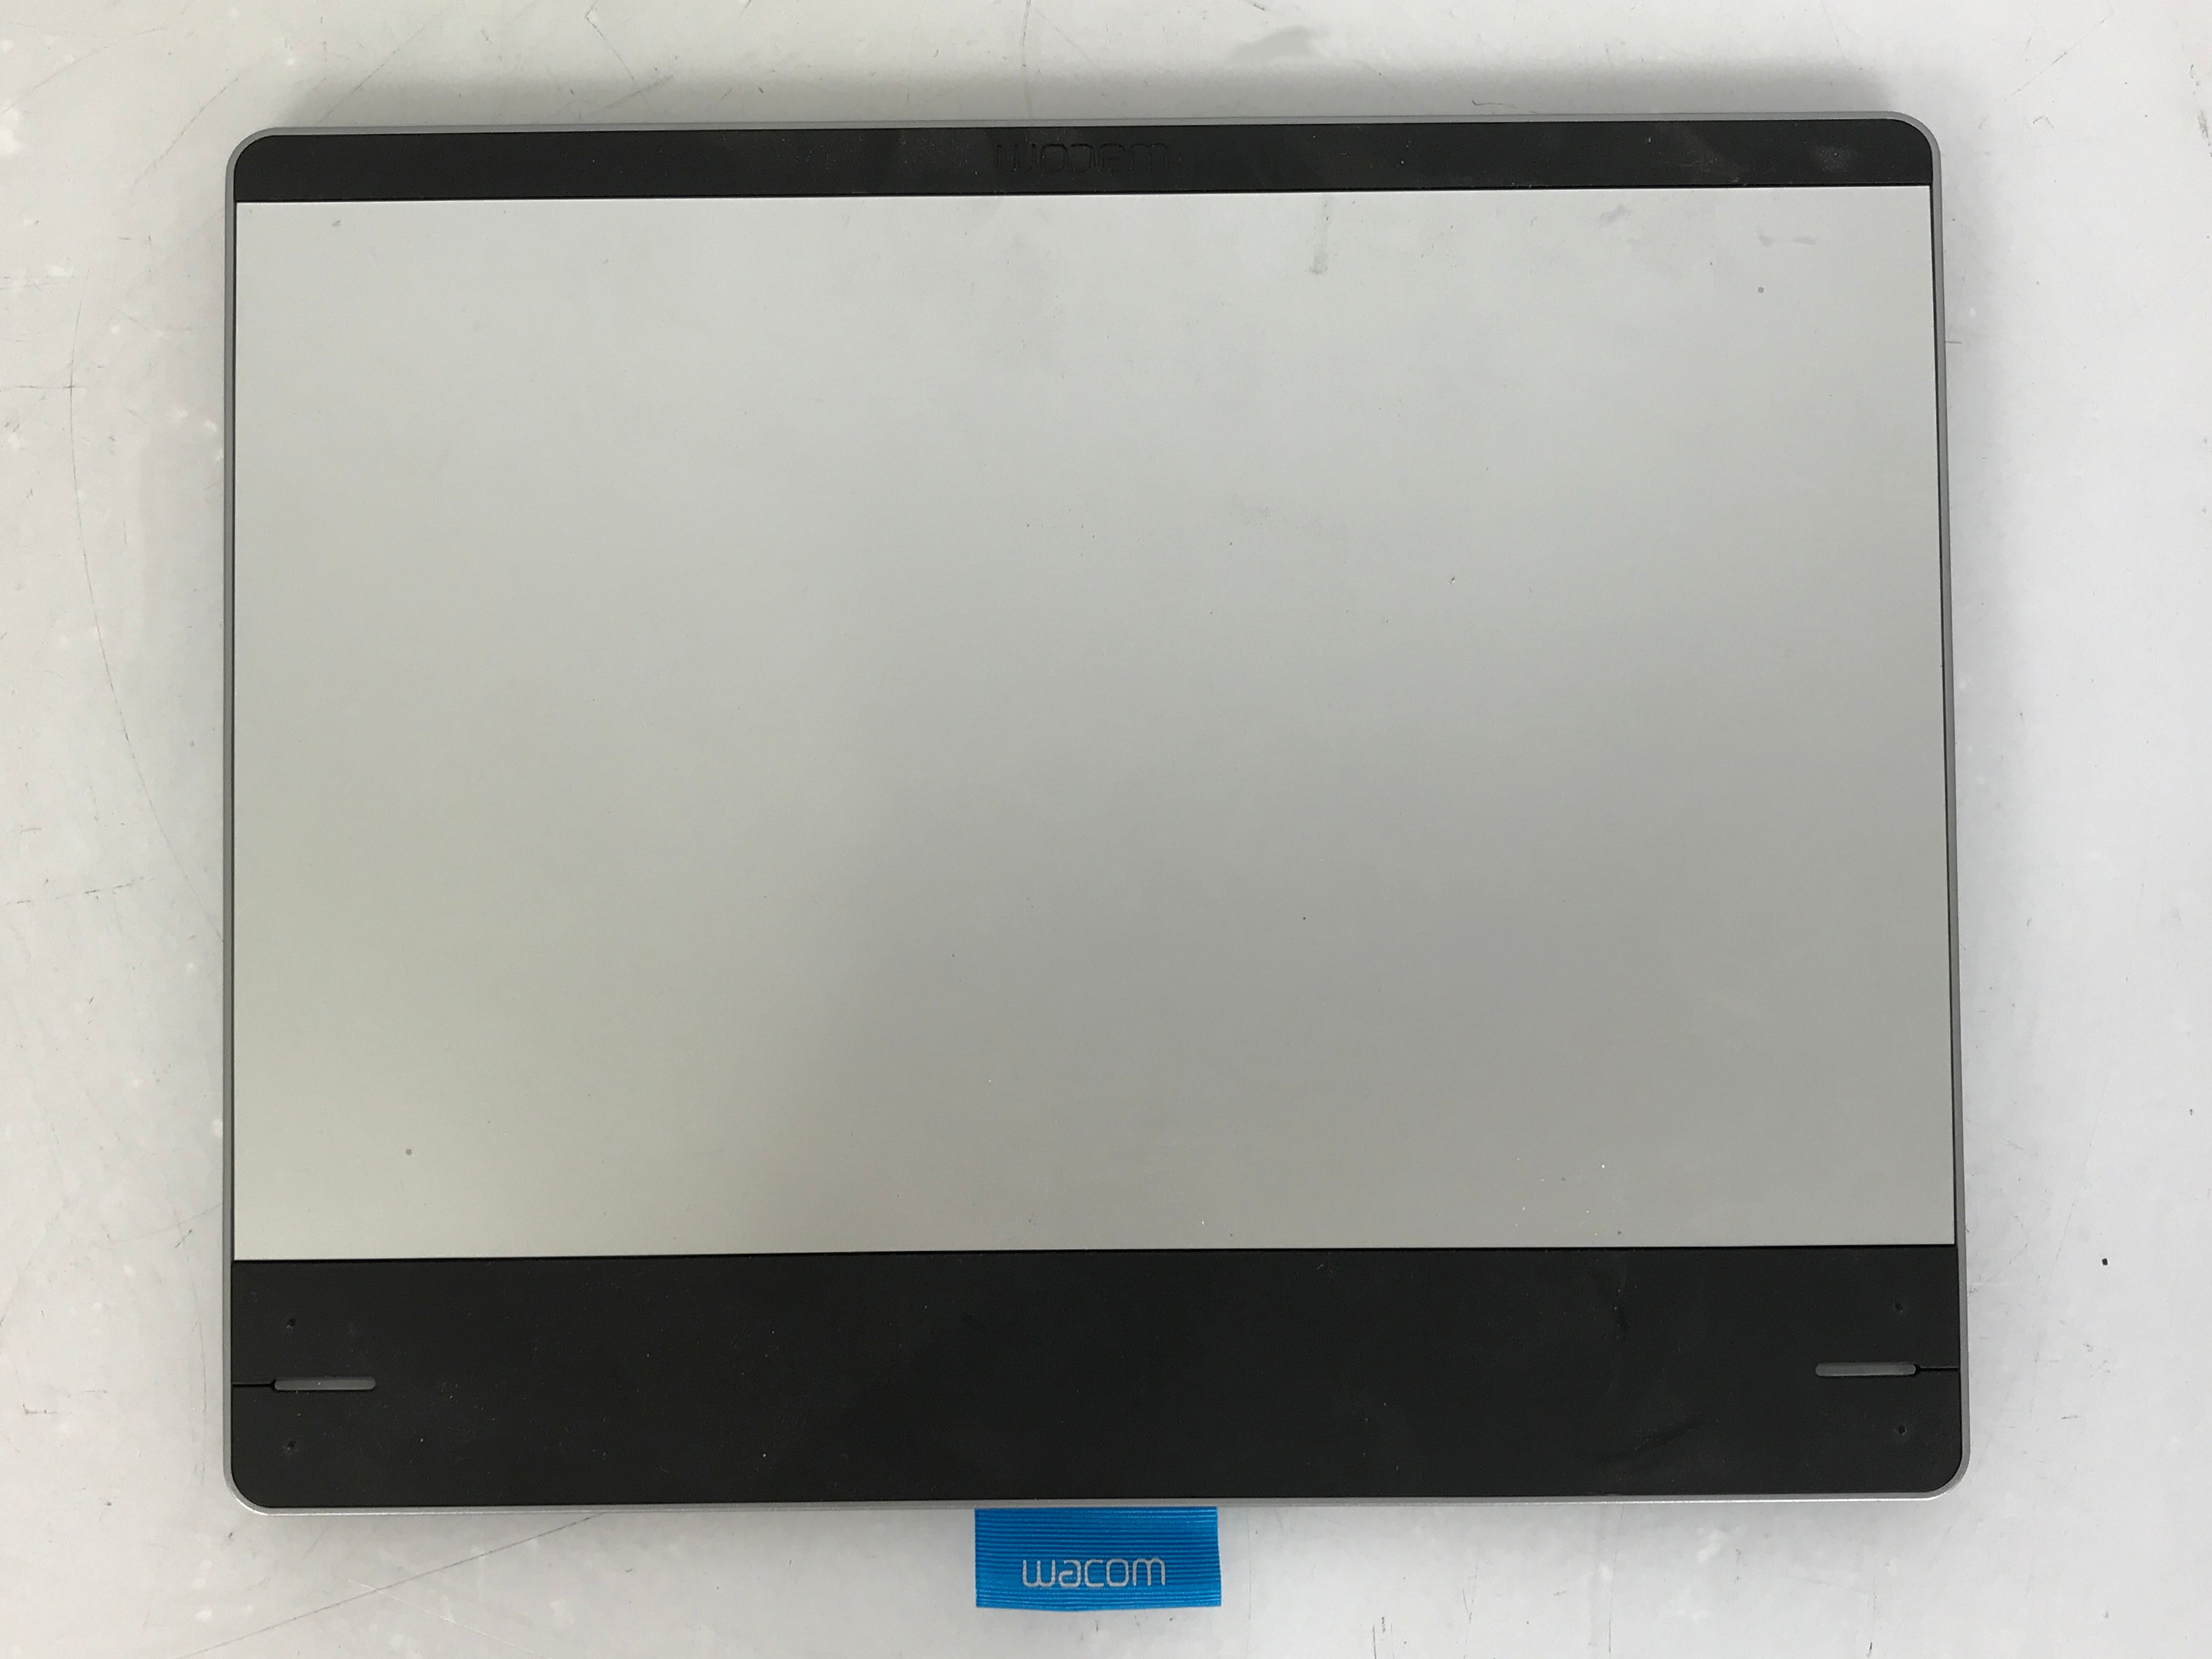 Intuos Silver CTH-680 Pen and Touch Medium Drawing Tablet – MSU